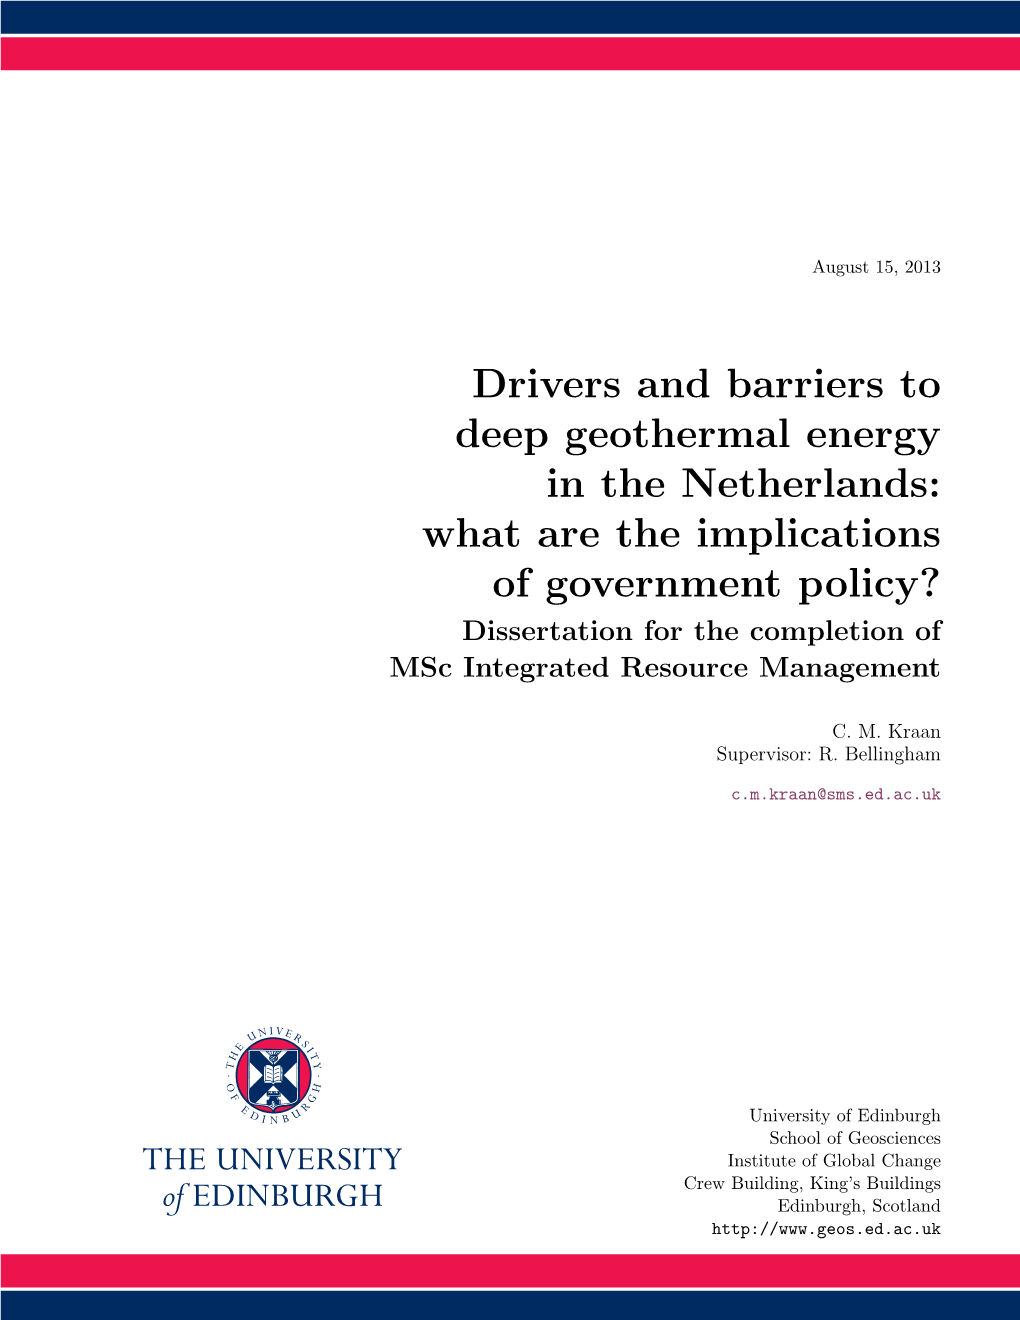 Drivers and Barriers to Deep Geothermal Energy in the Netherlands